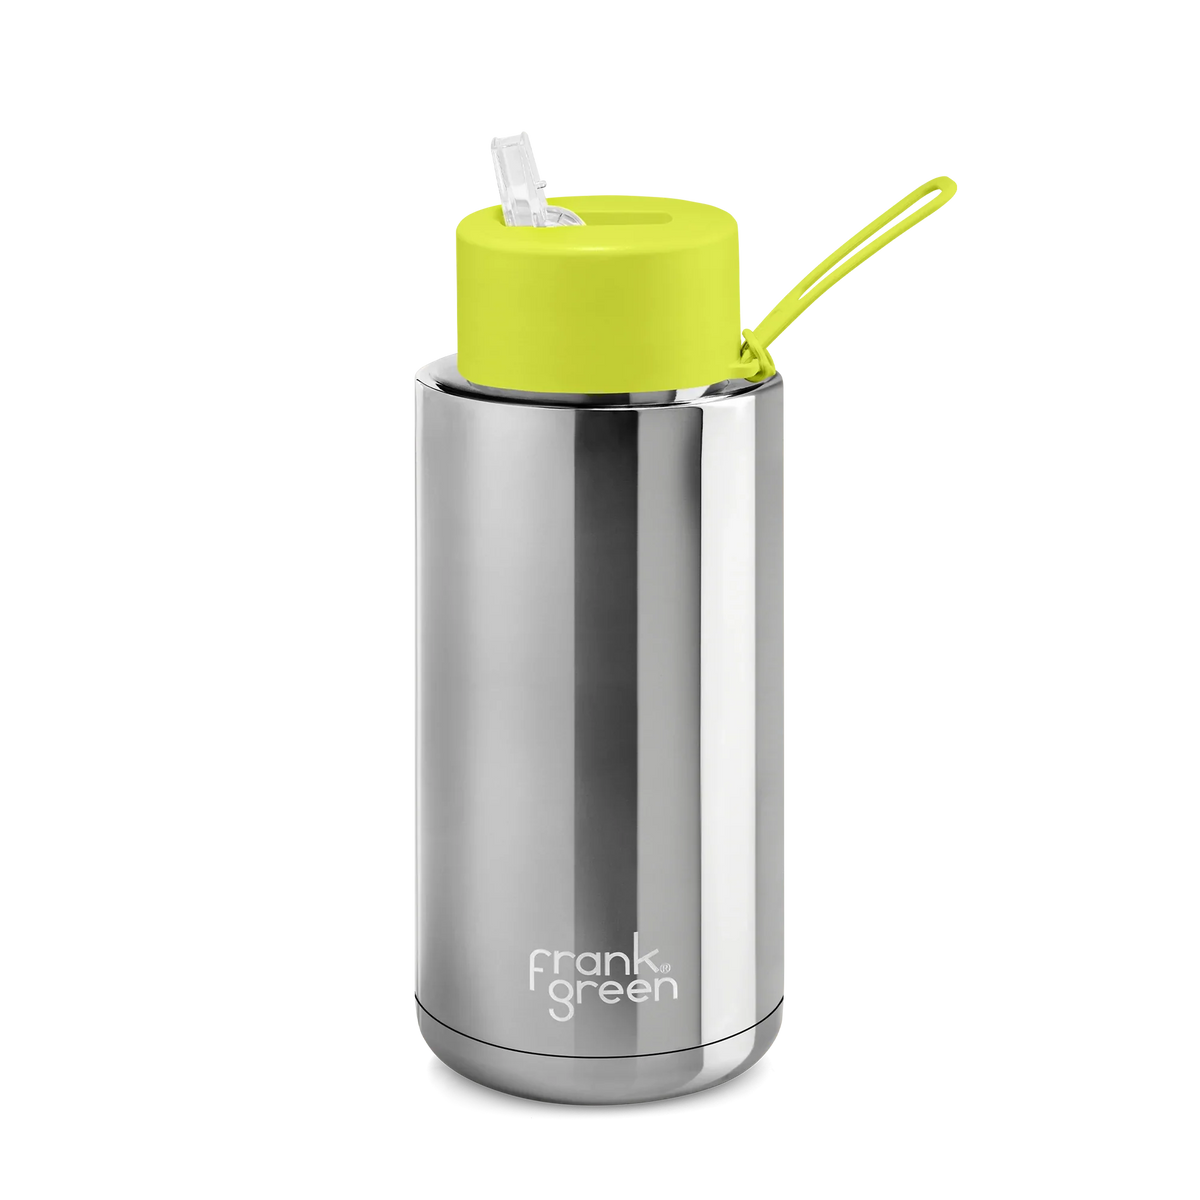 Frank Green Limited Edition Ceramic Drink Bottle | 34 oz 1000 ml | Silver Neon Yellow Straw